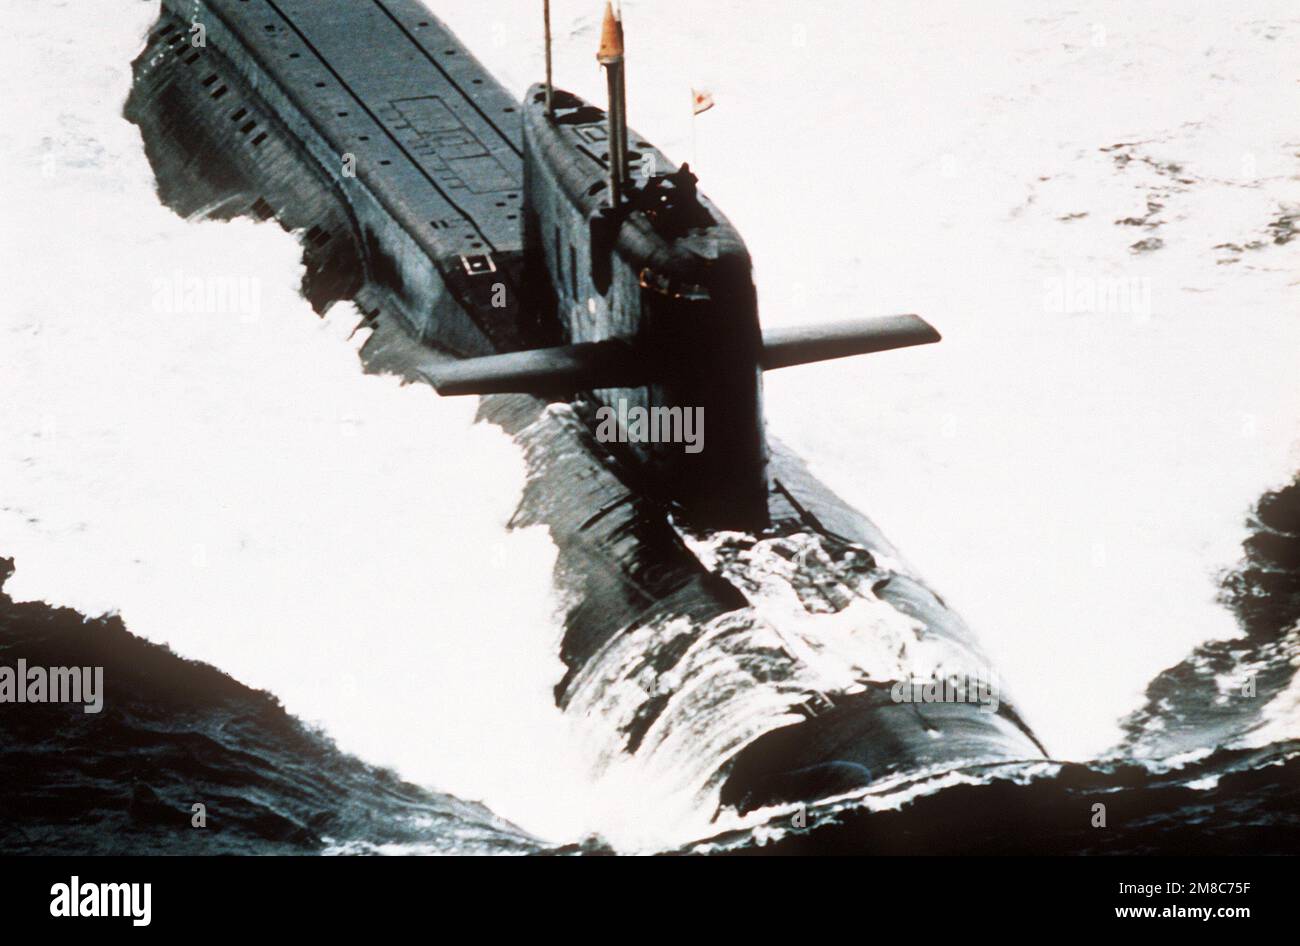 A close-up view of a Yankee Notch Class submarine underway. This is a conversion of a Yankee Class Soviet ballistic missile submarine into a strategic cruise missile platform. Country: Unknown Stock Photo